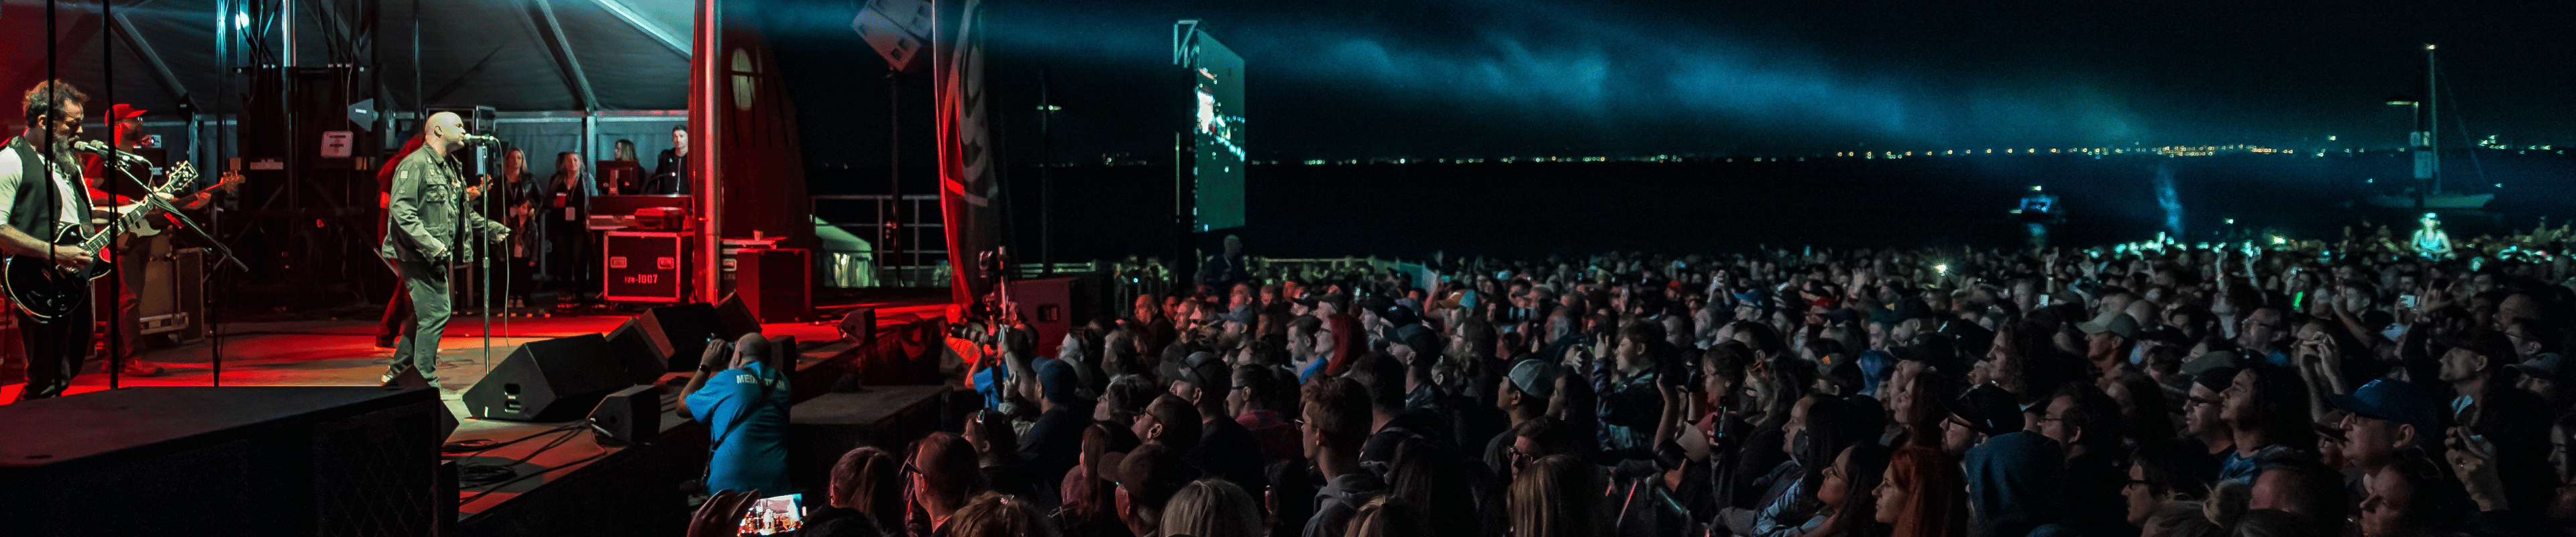 image of crowd watching performance at night